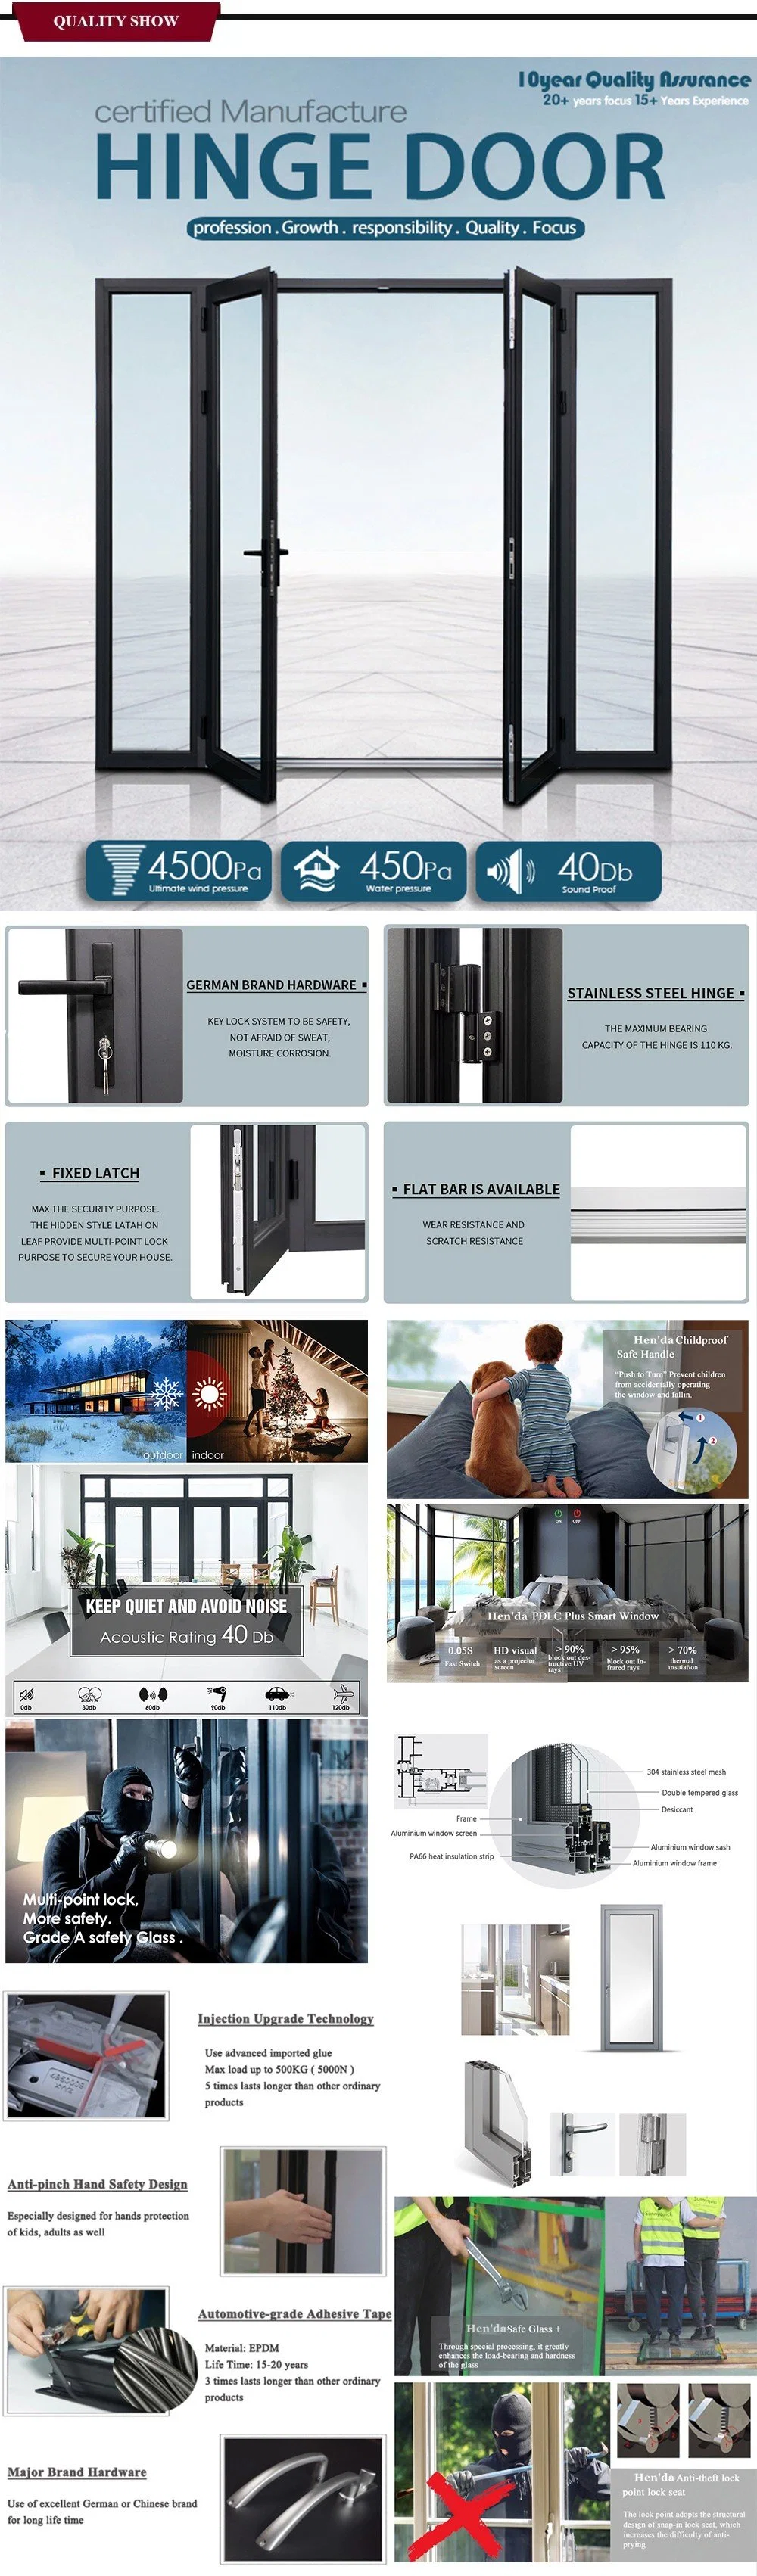 Exterior Patio Heavy Pocket French Double Glazed Inside Wall Commercial Electric Automatic Tempered Glass Aluminum Balcony Sliding French Double Door